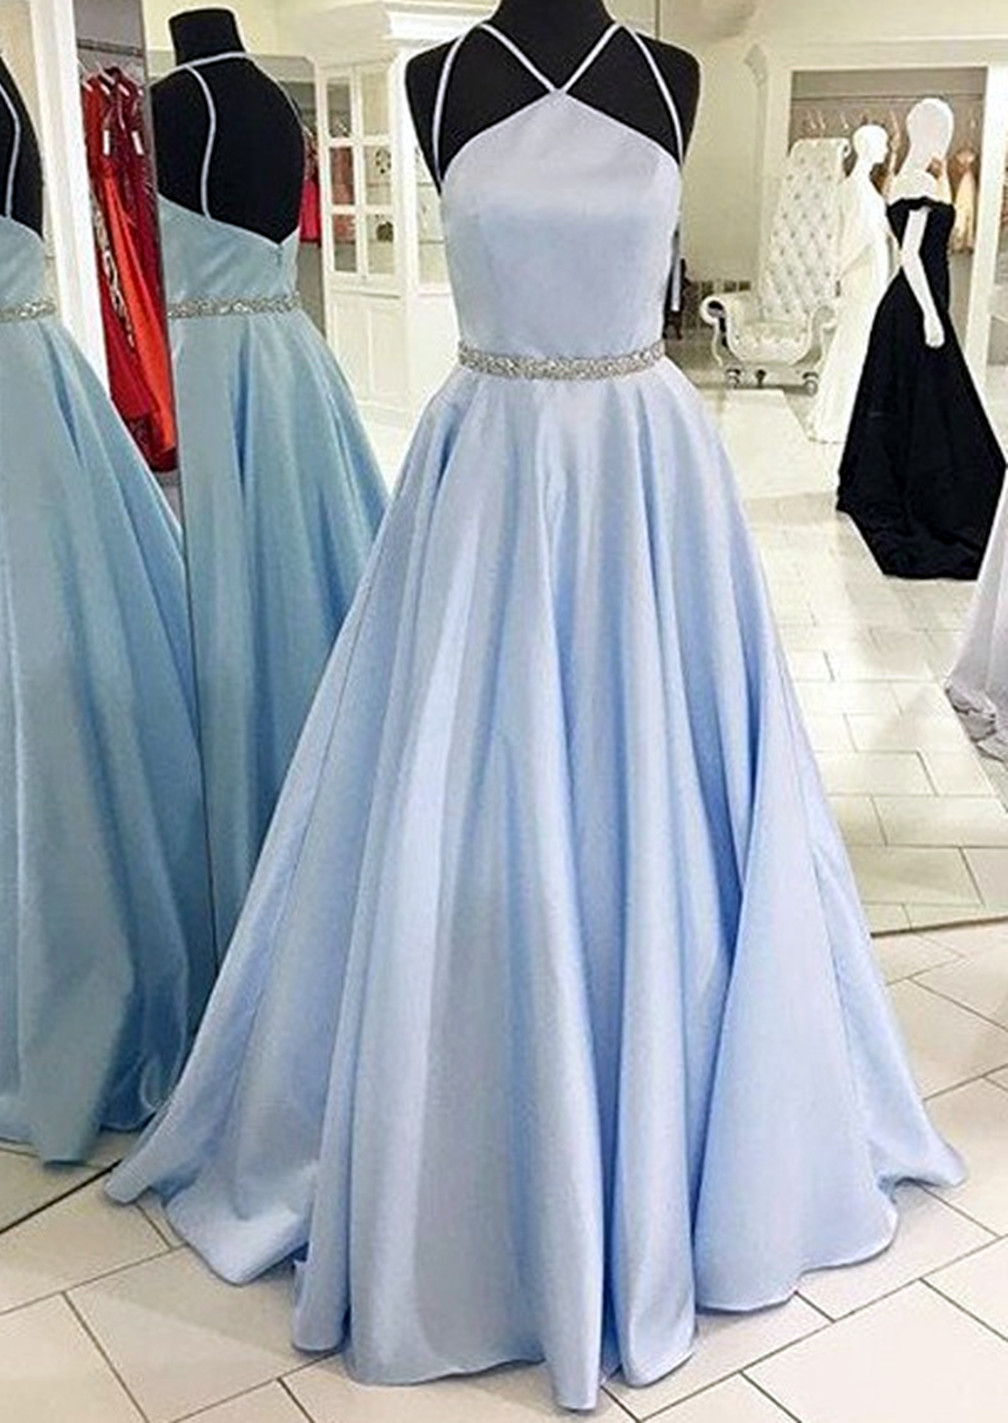 Women A-line/princess Satin Prom Dresses Long Halter Evening Party Gowns Sleeveless Formal Dress Yp081